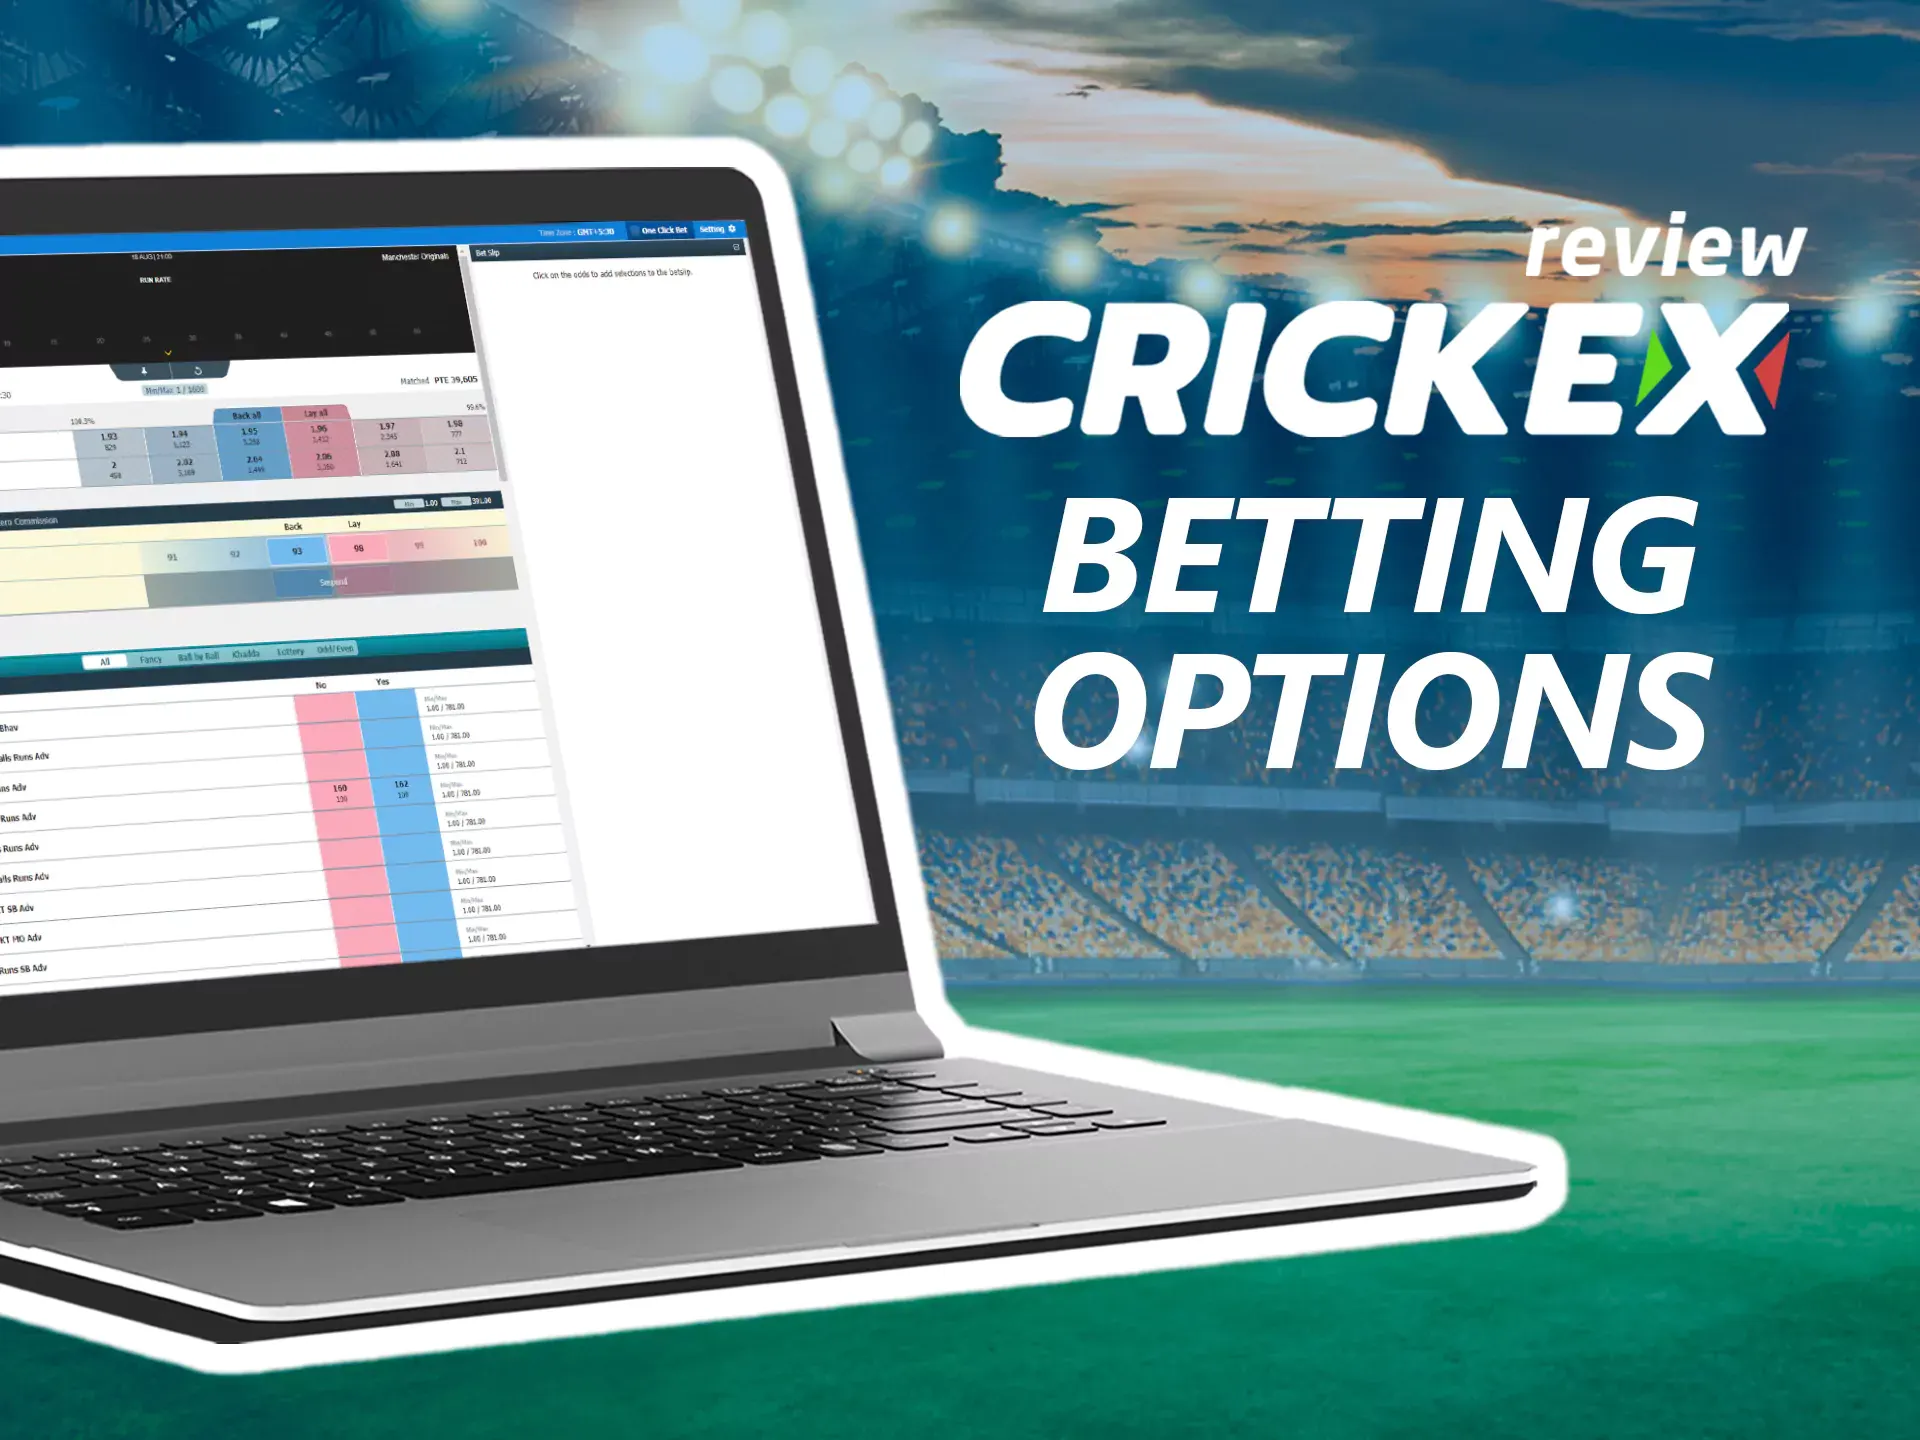 Crickex offers a variety of options for sports betting.